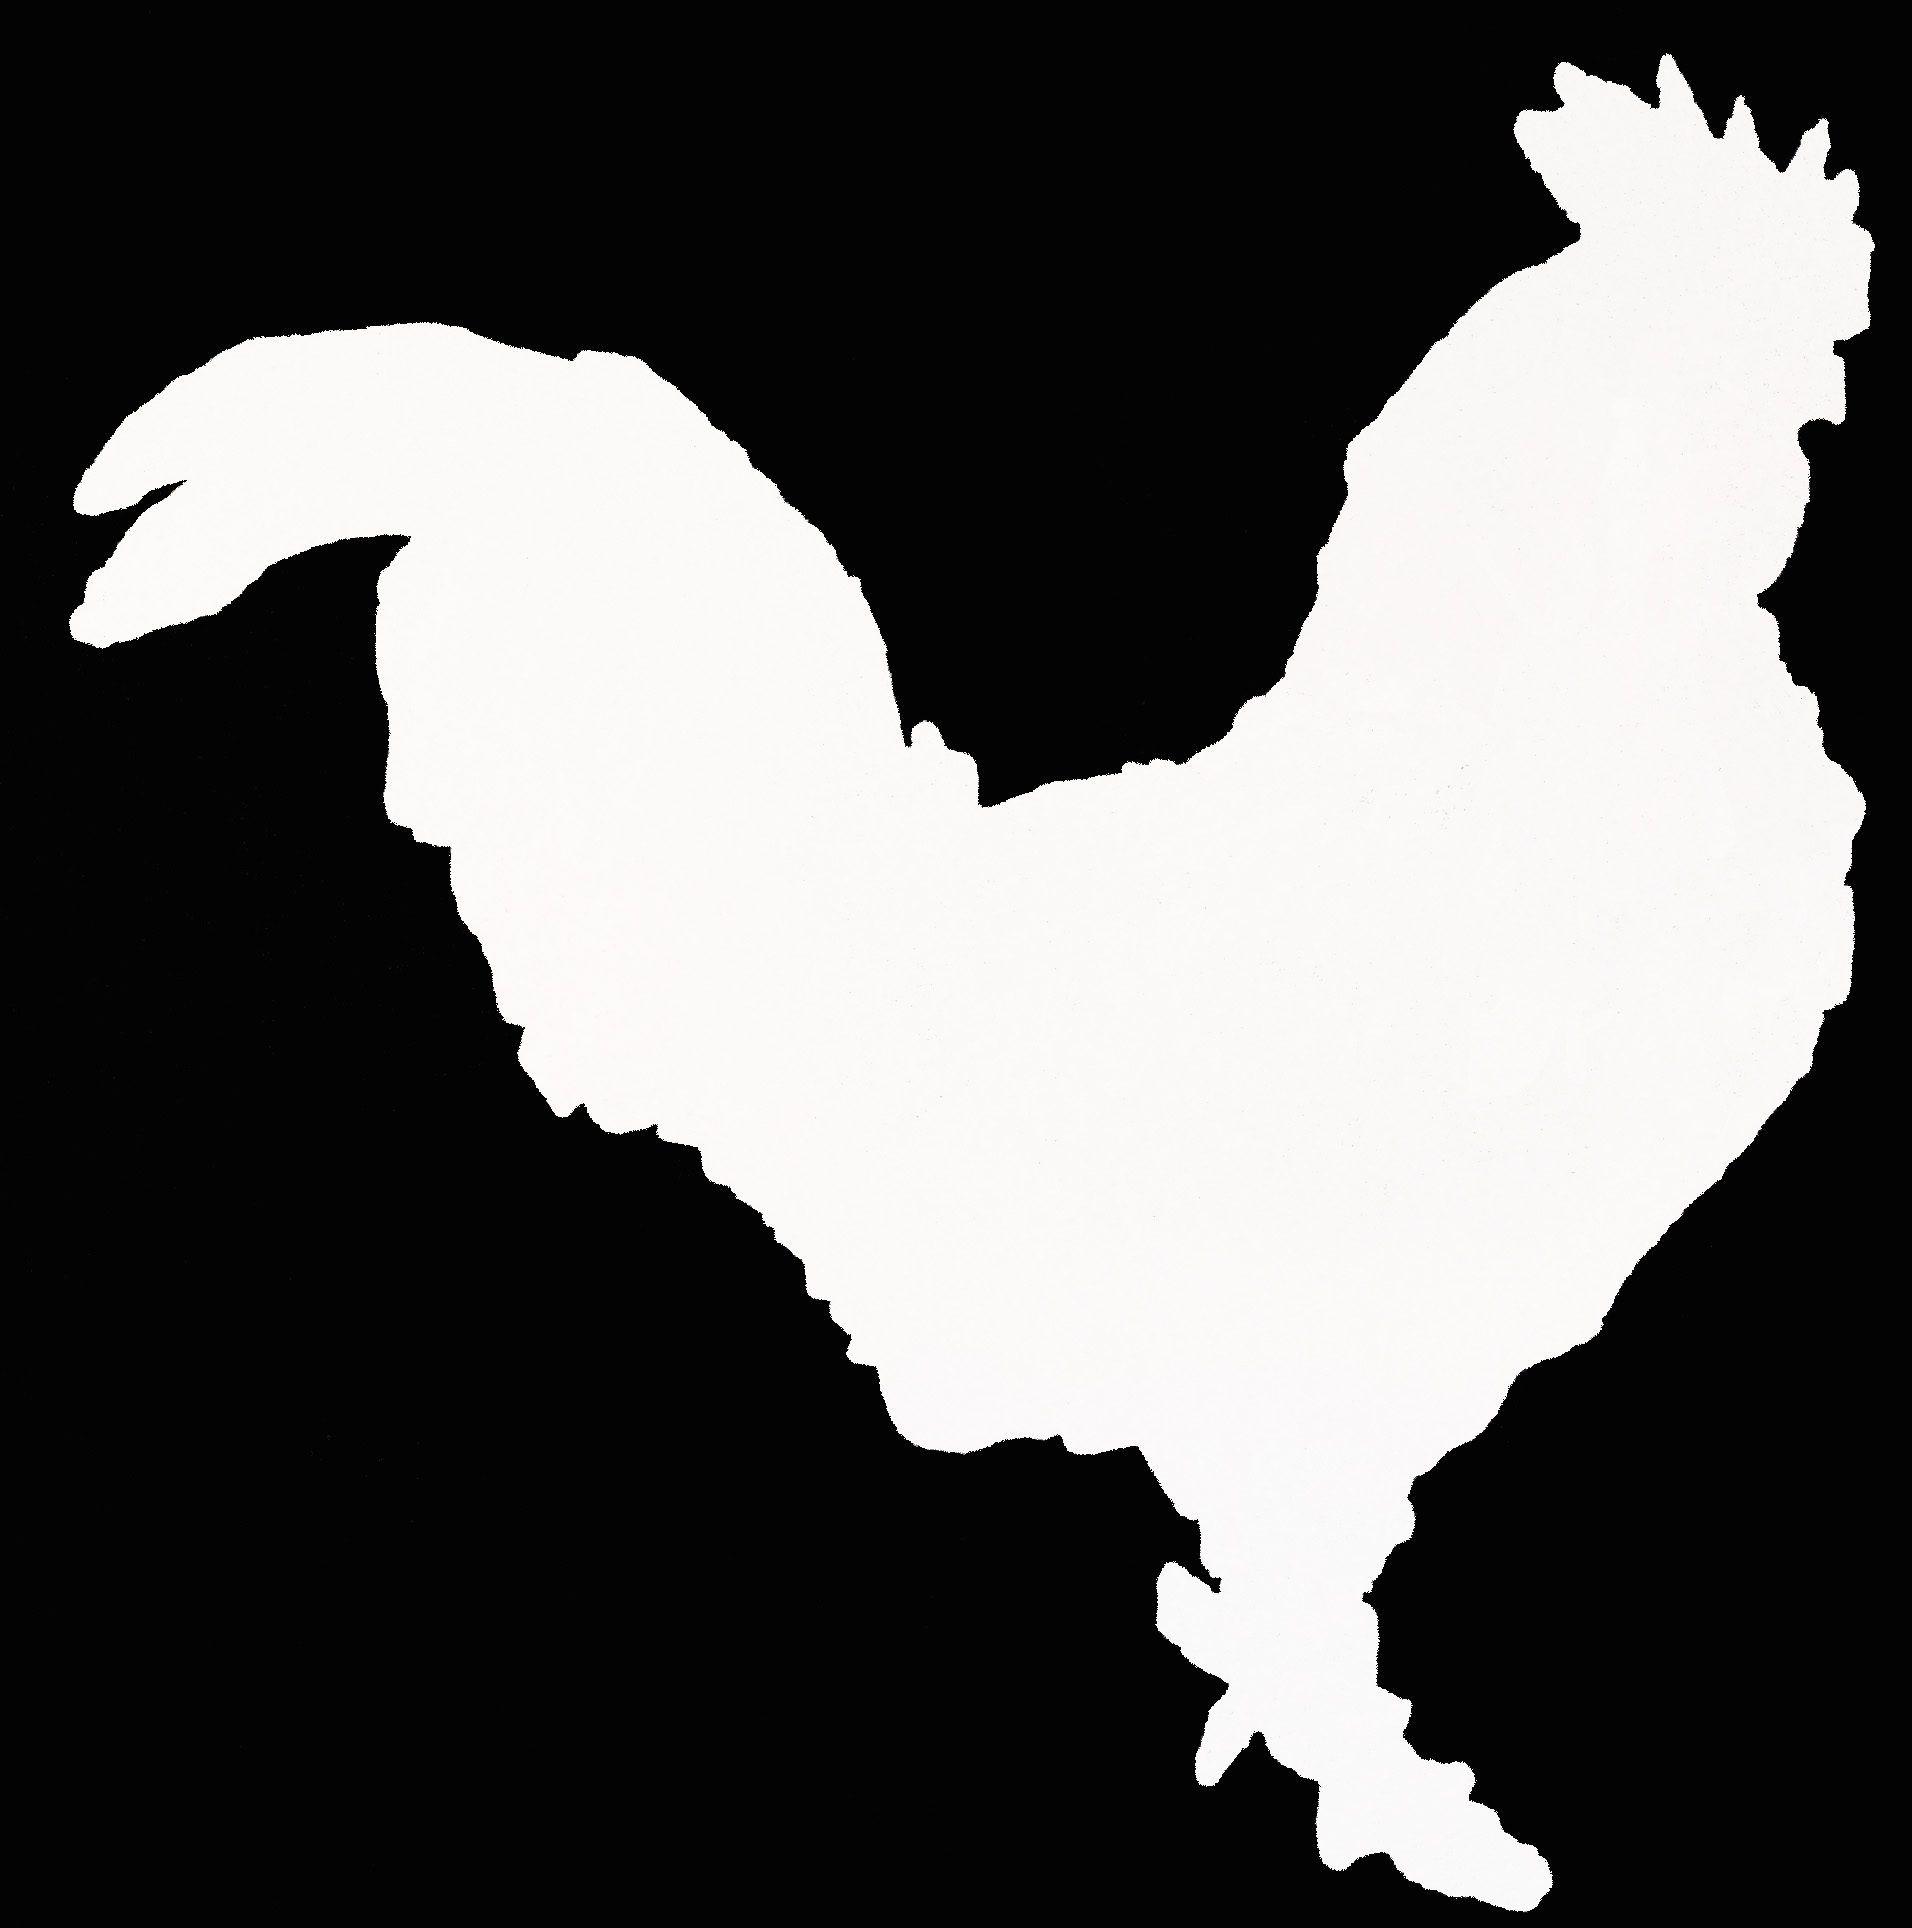 Black and White Rooster Logo - White Rooster Studio